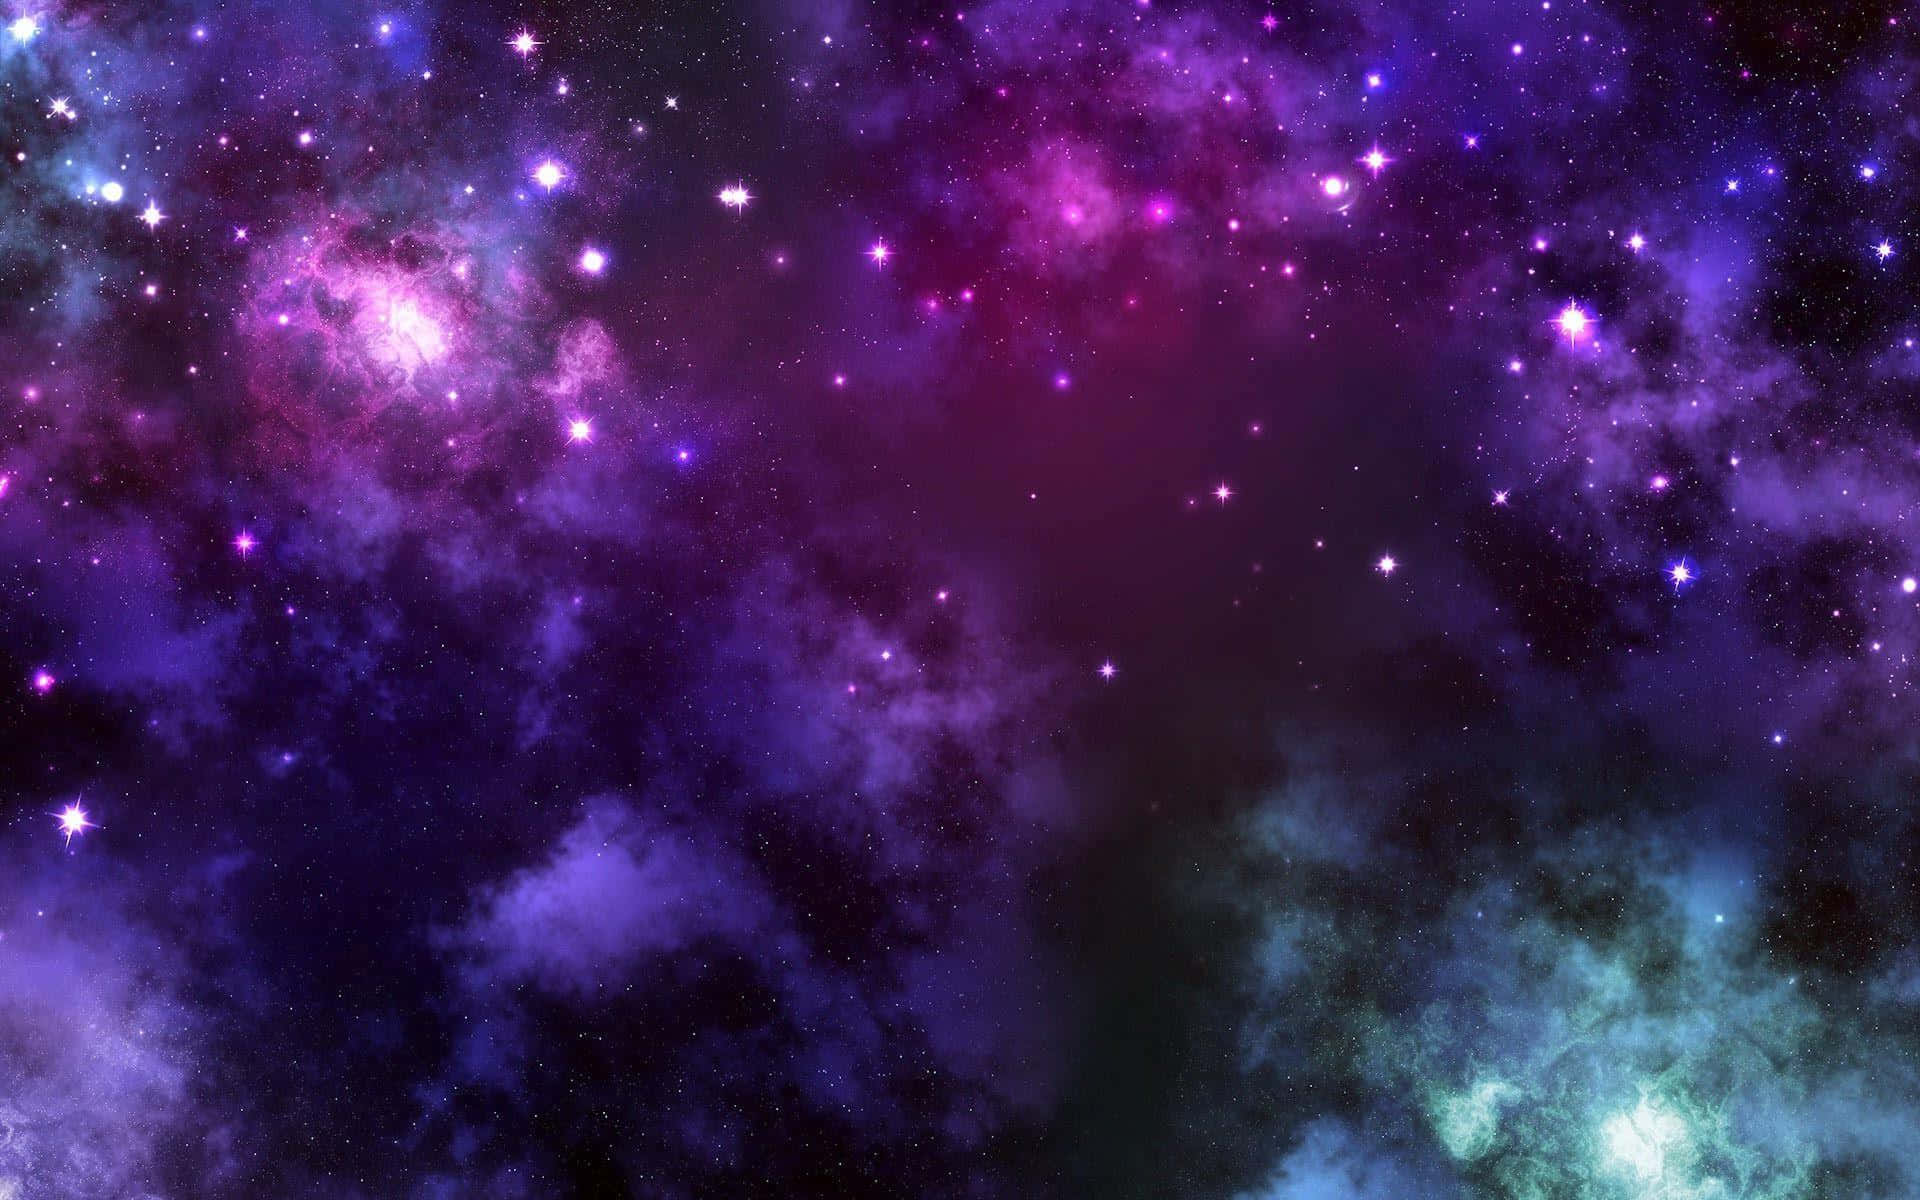 A Spectacular View of the Purple Galaxy